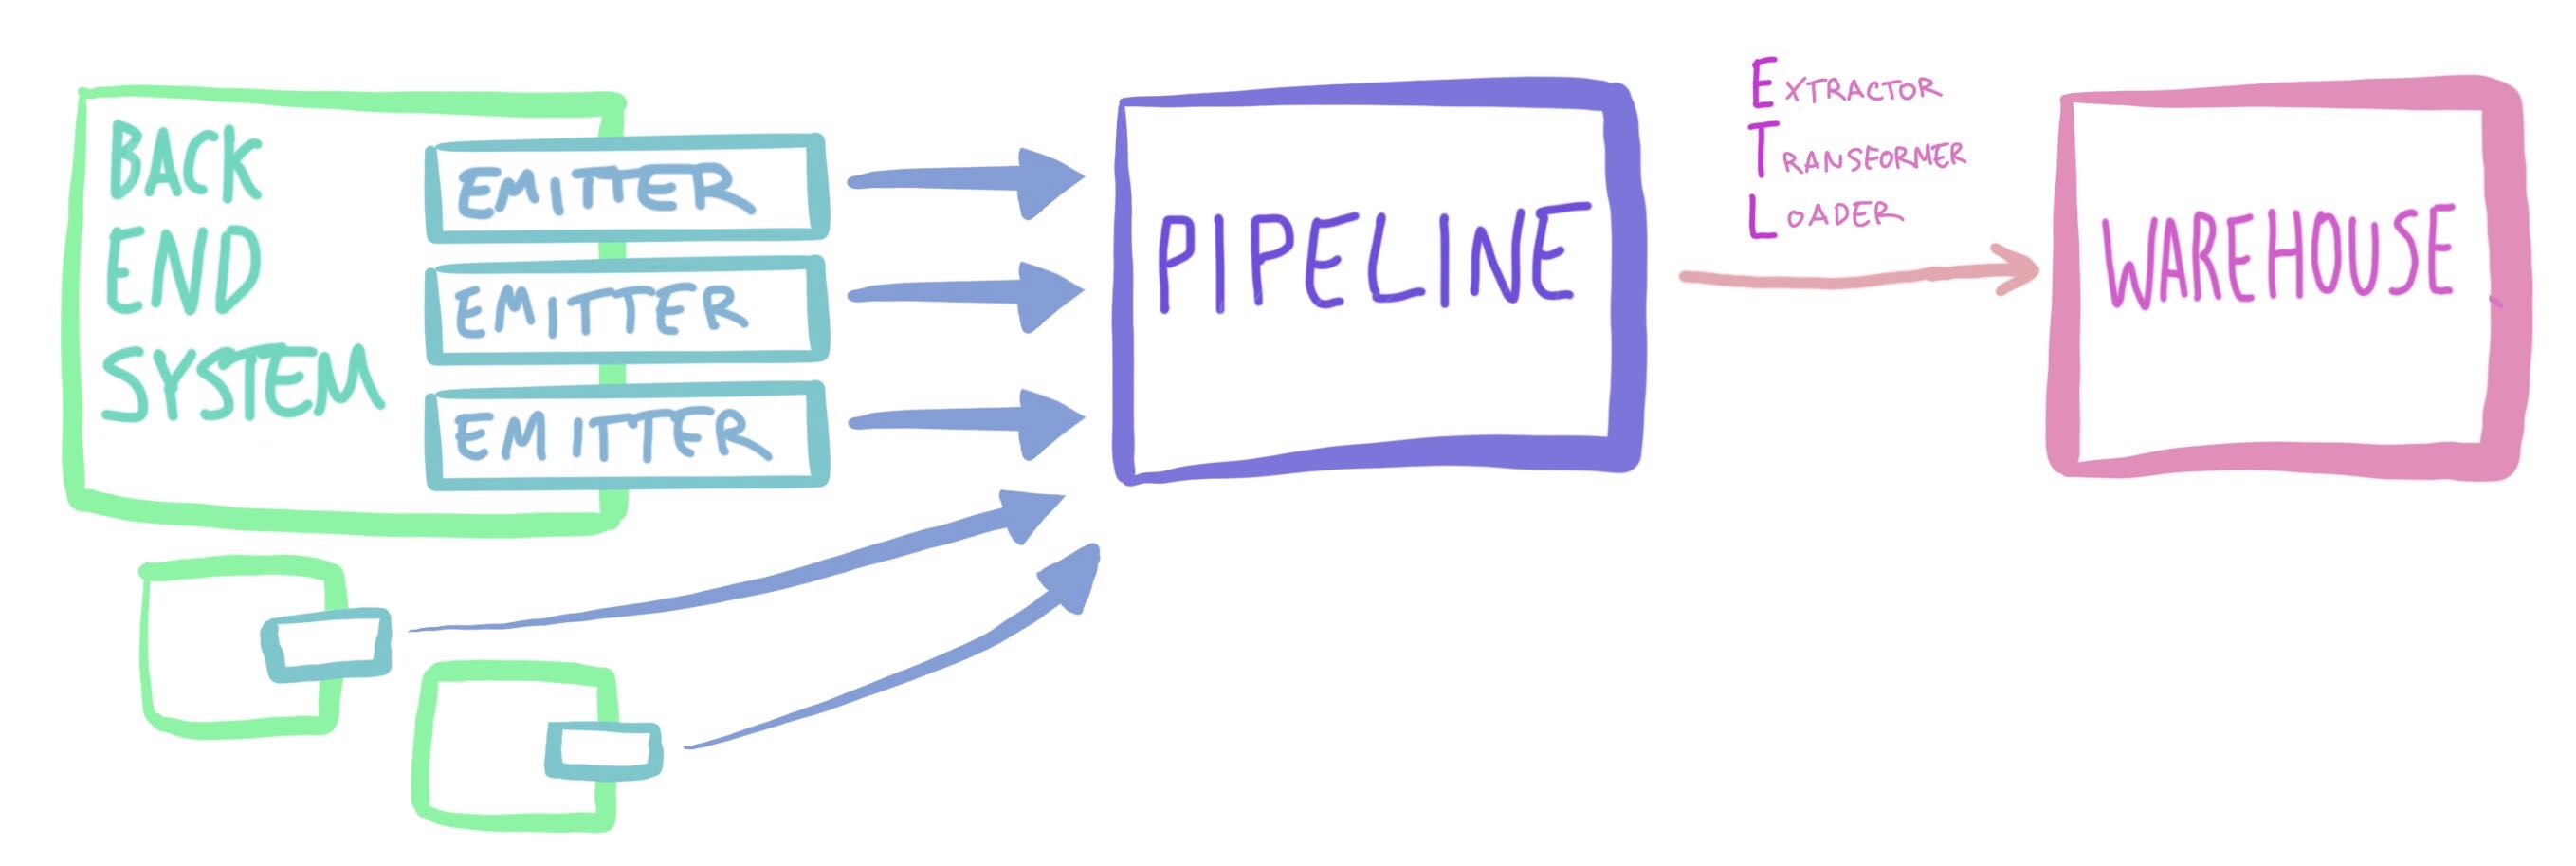 Back end systems emit to the pipeline, then the ETL process moves that data into the warehouse.